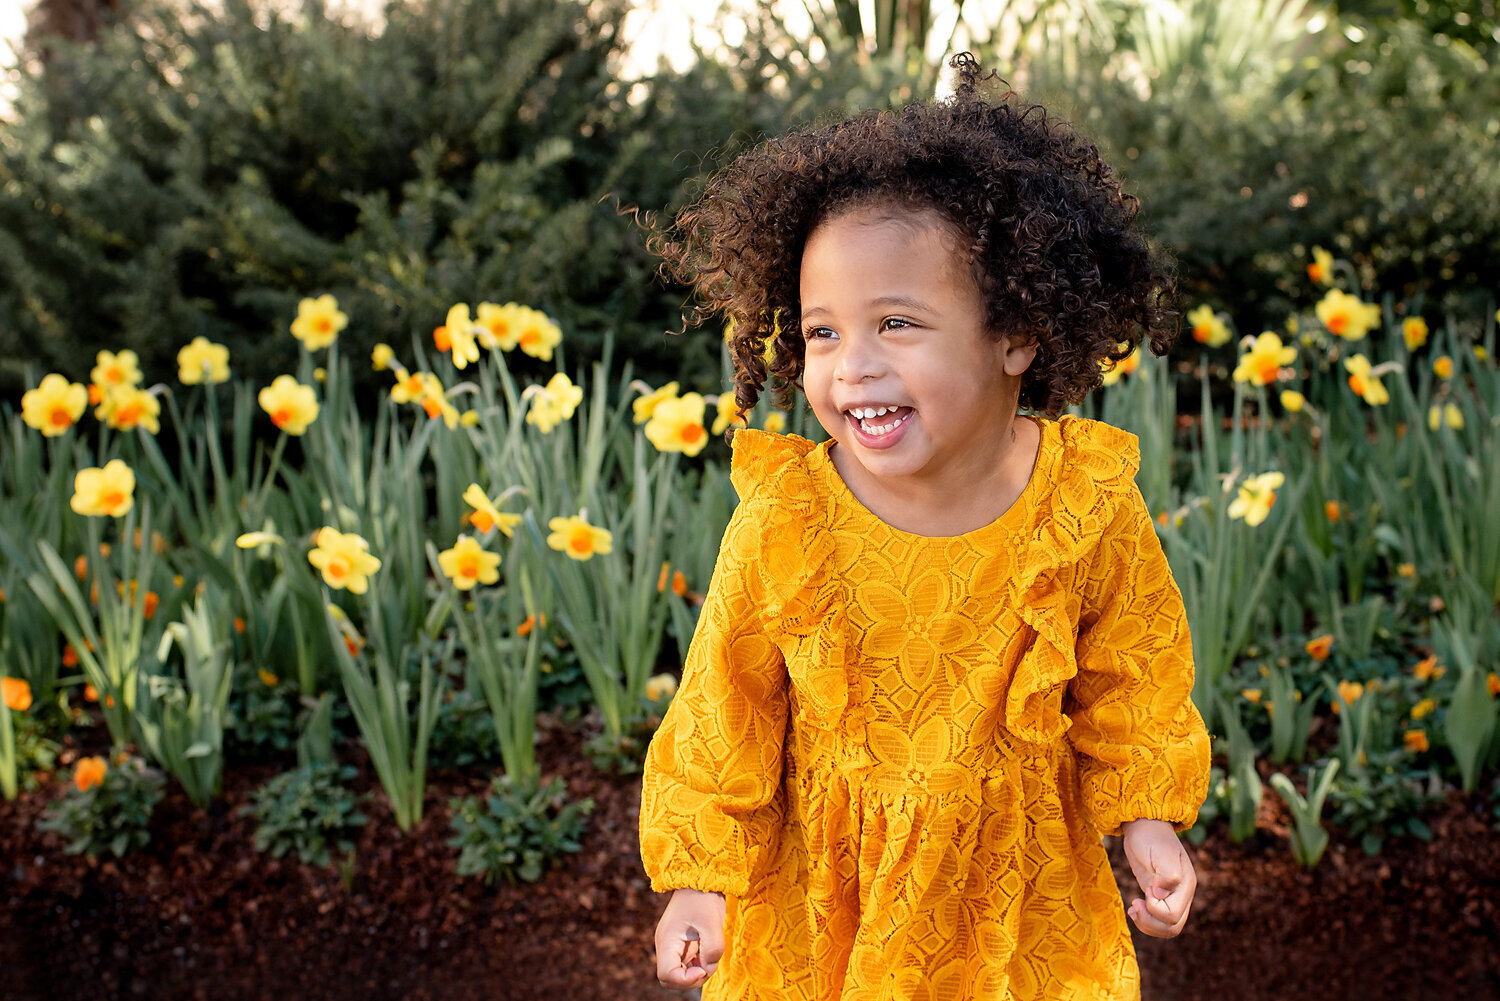 A young girl with curly hair wearing a yellow dress and smiling and laughing standing in front of yellow flowers.